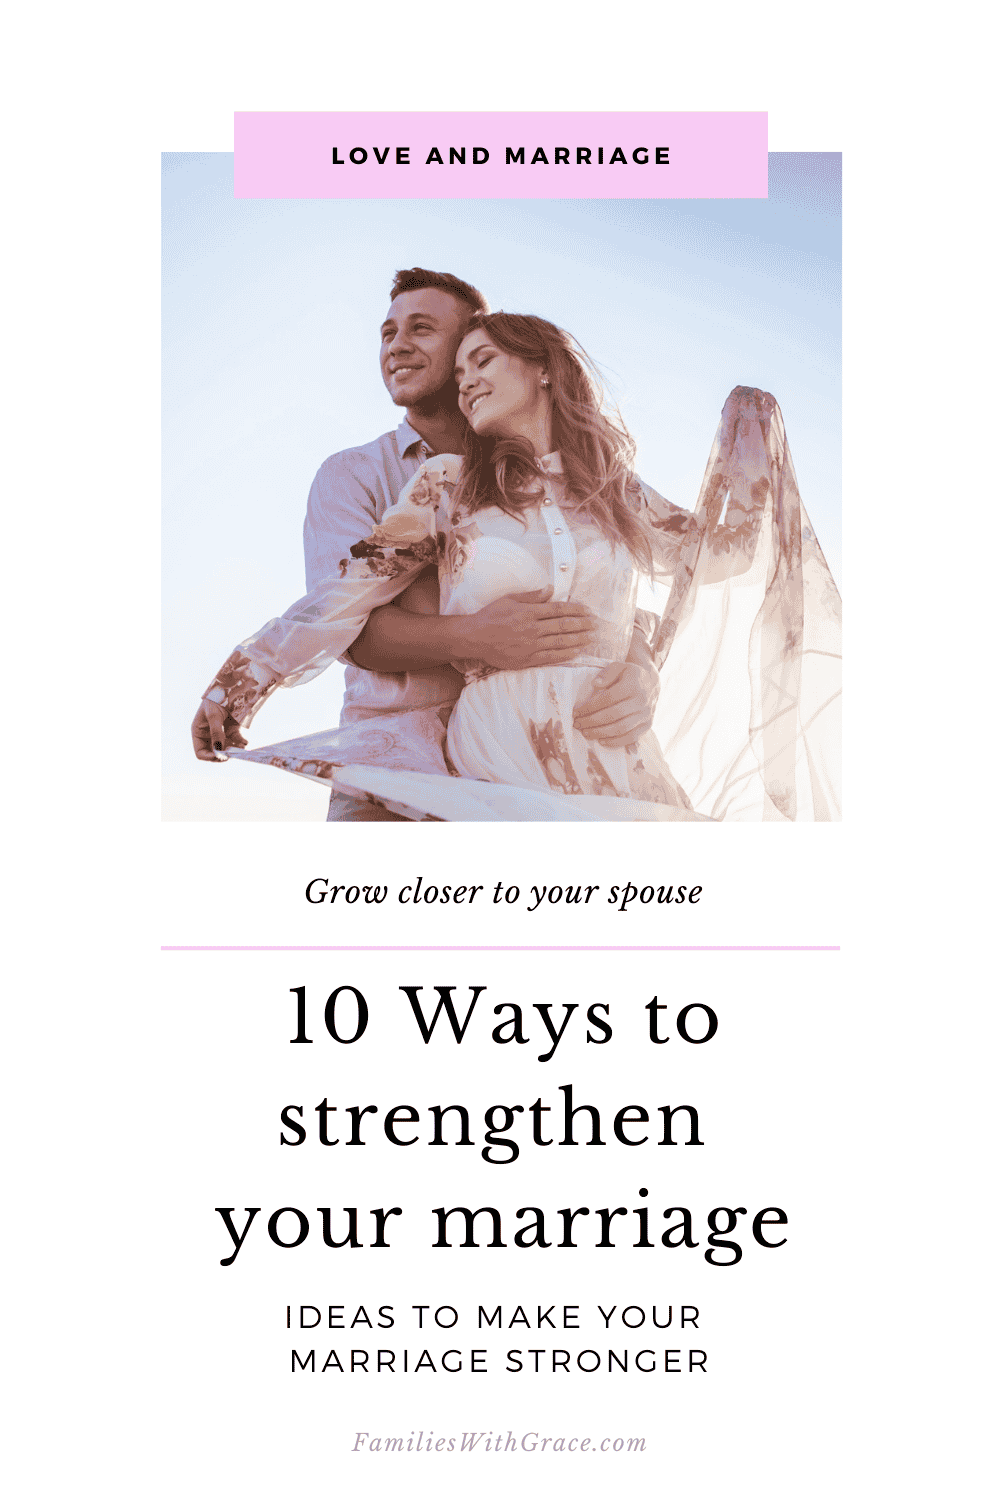 10 Ways to strengthen your marriage